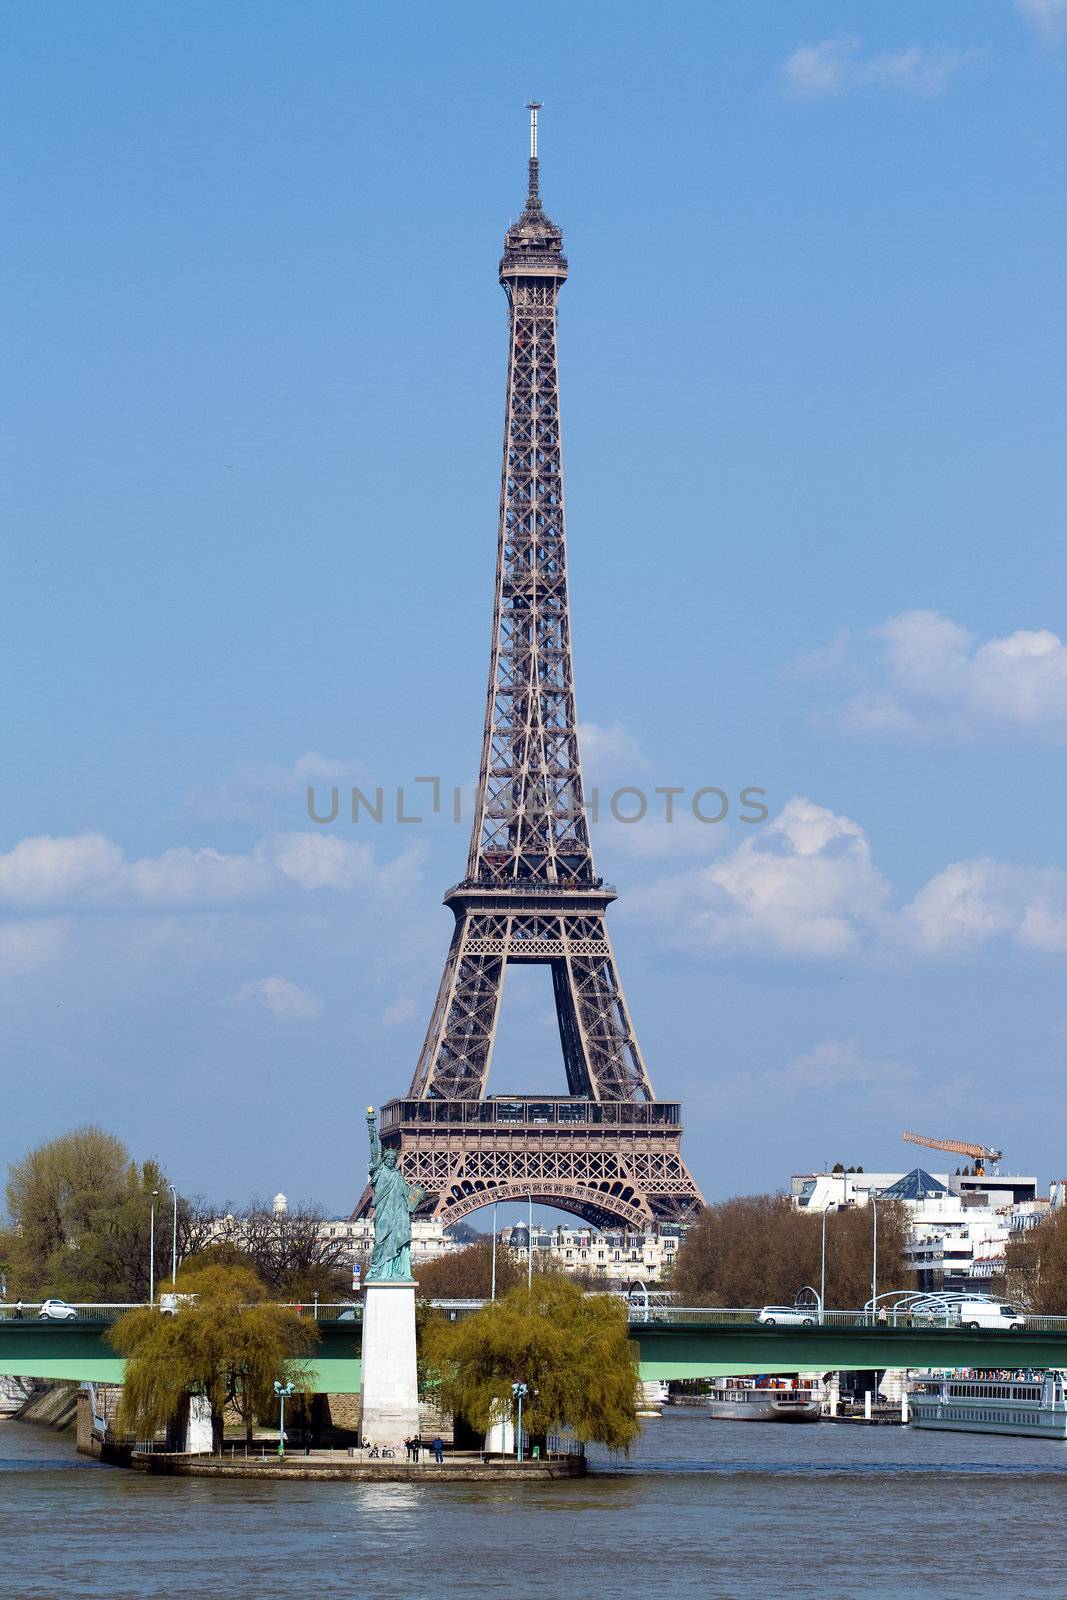 Statue of liberty on the river Seine and Eiffel tower in Paris, France, Europe